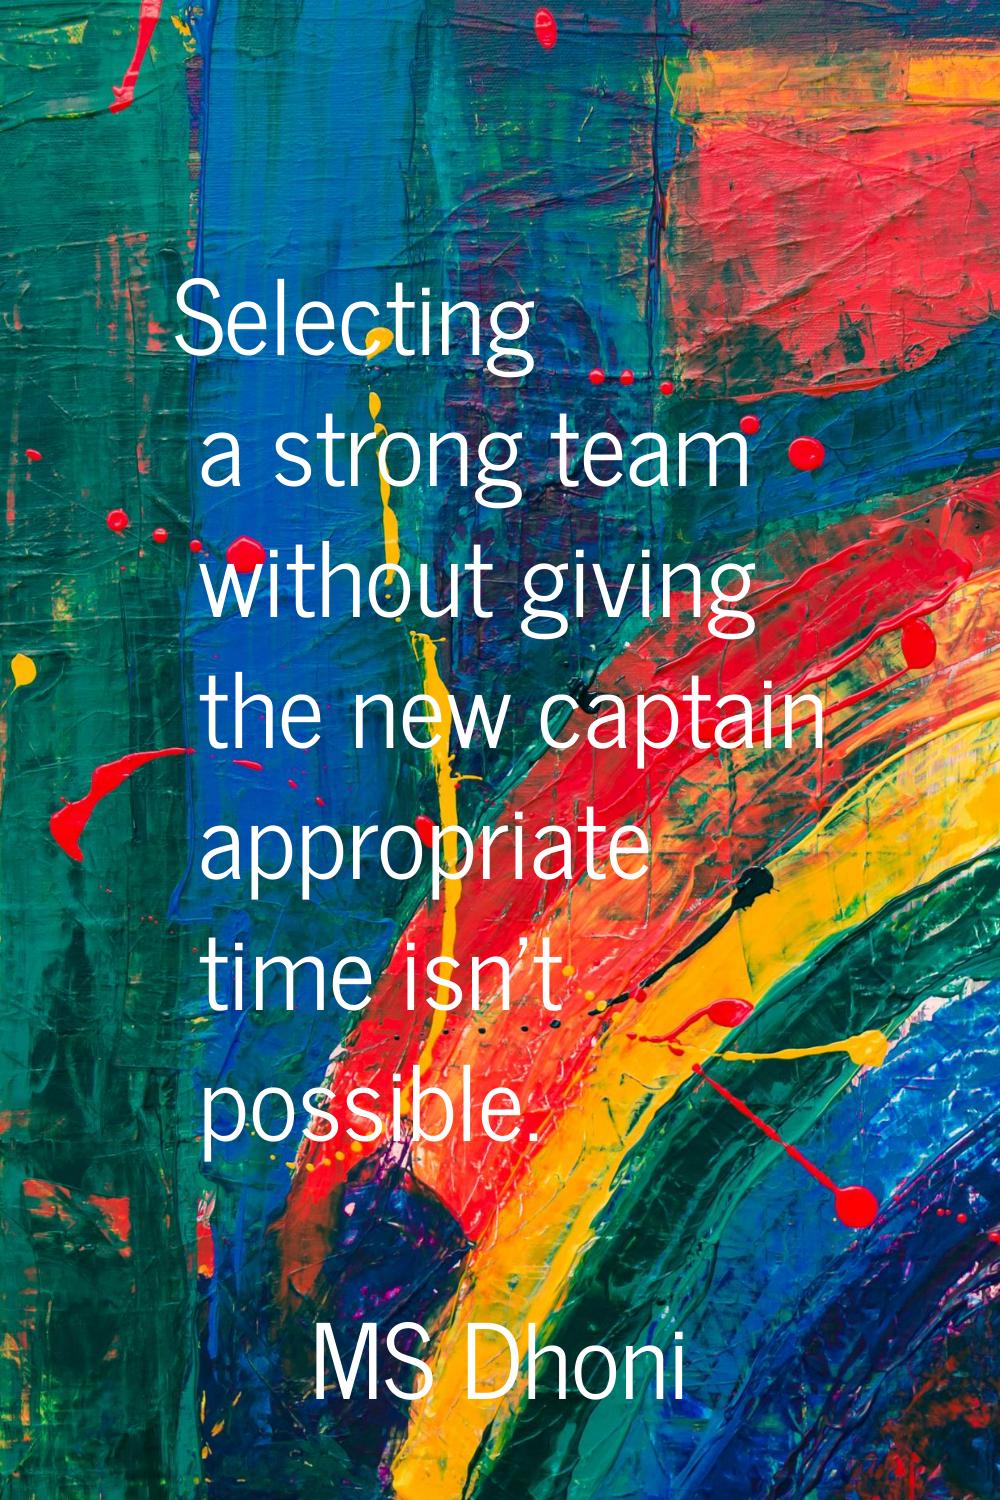 Selecting a strong team without giving the new captain appropriate time isn't possible.